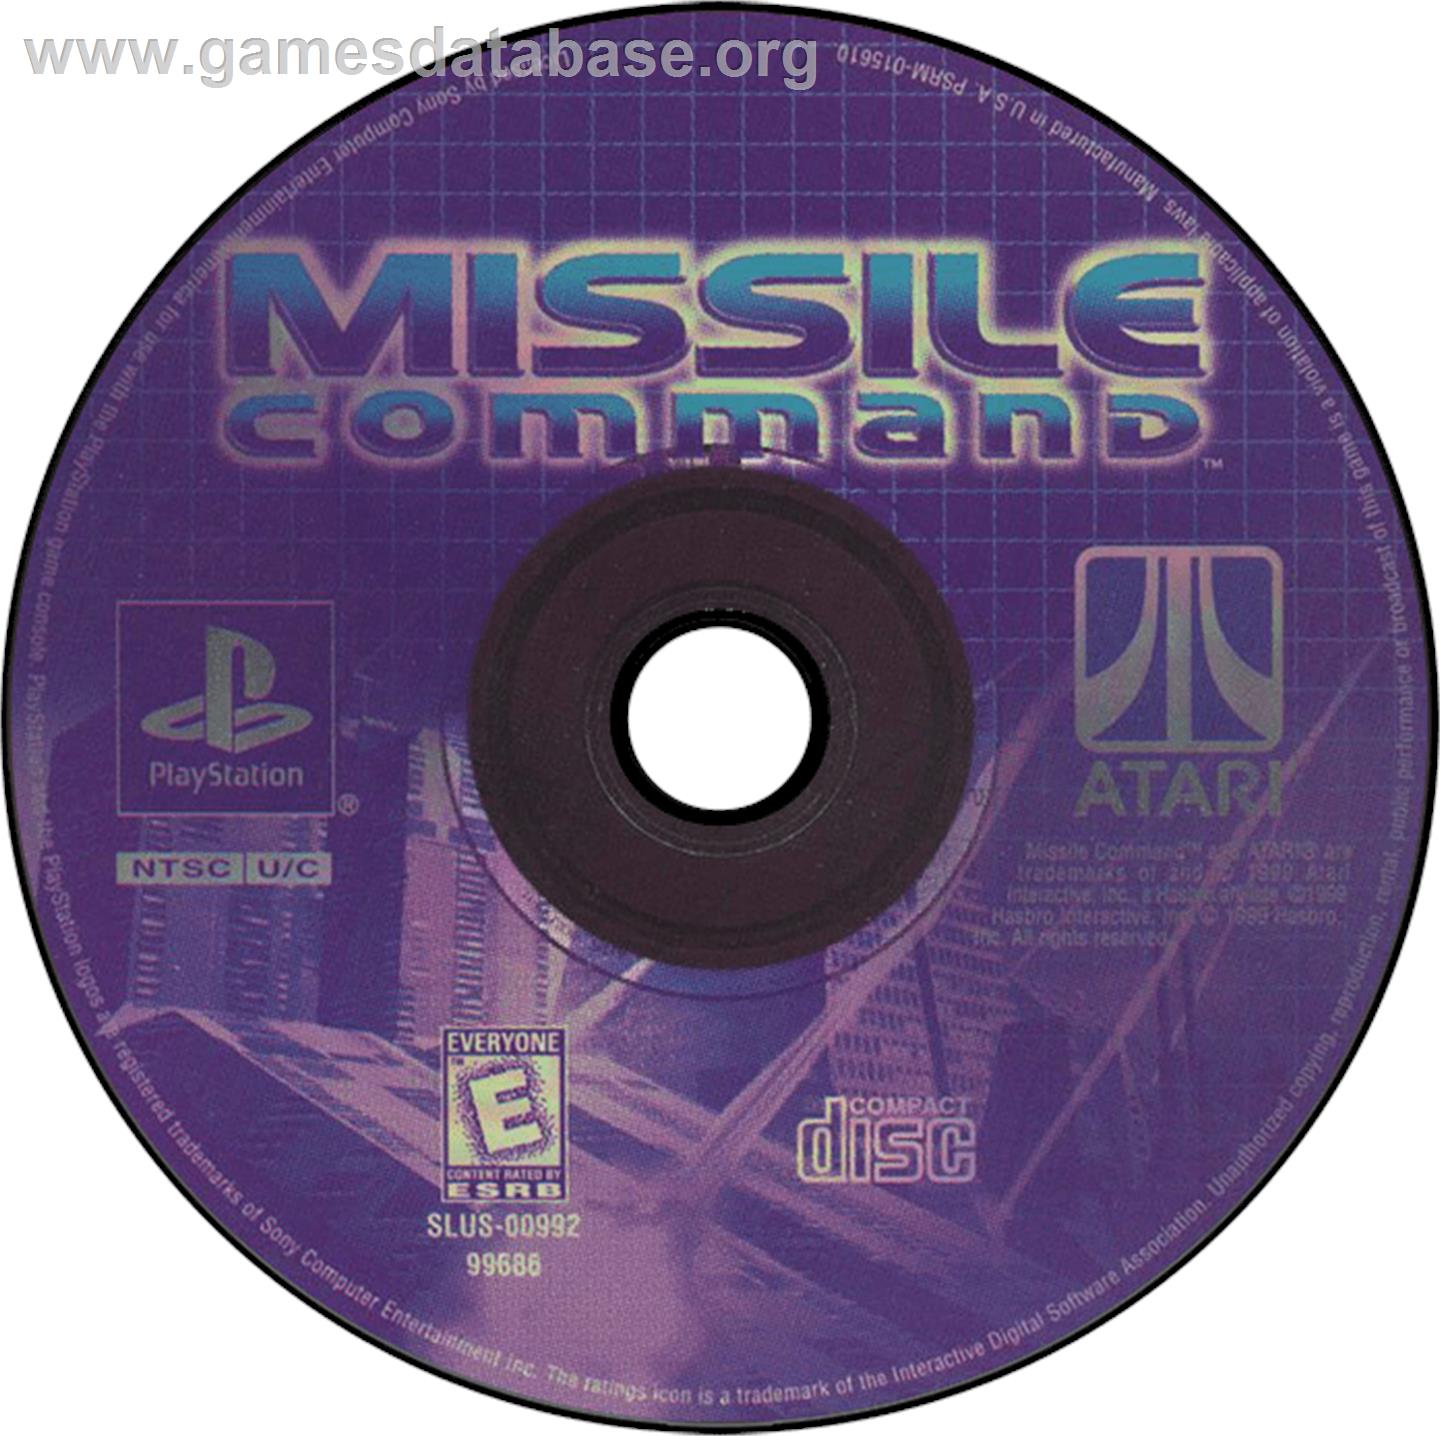 Missile Command - Sony Playstation - Artwork - Disc